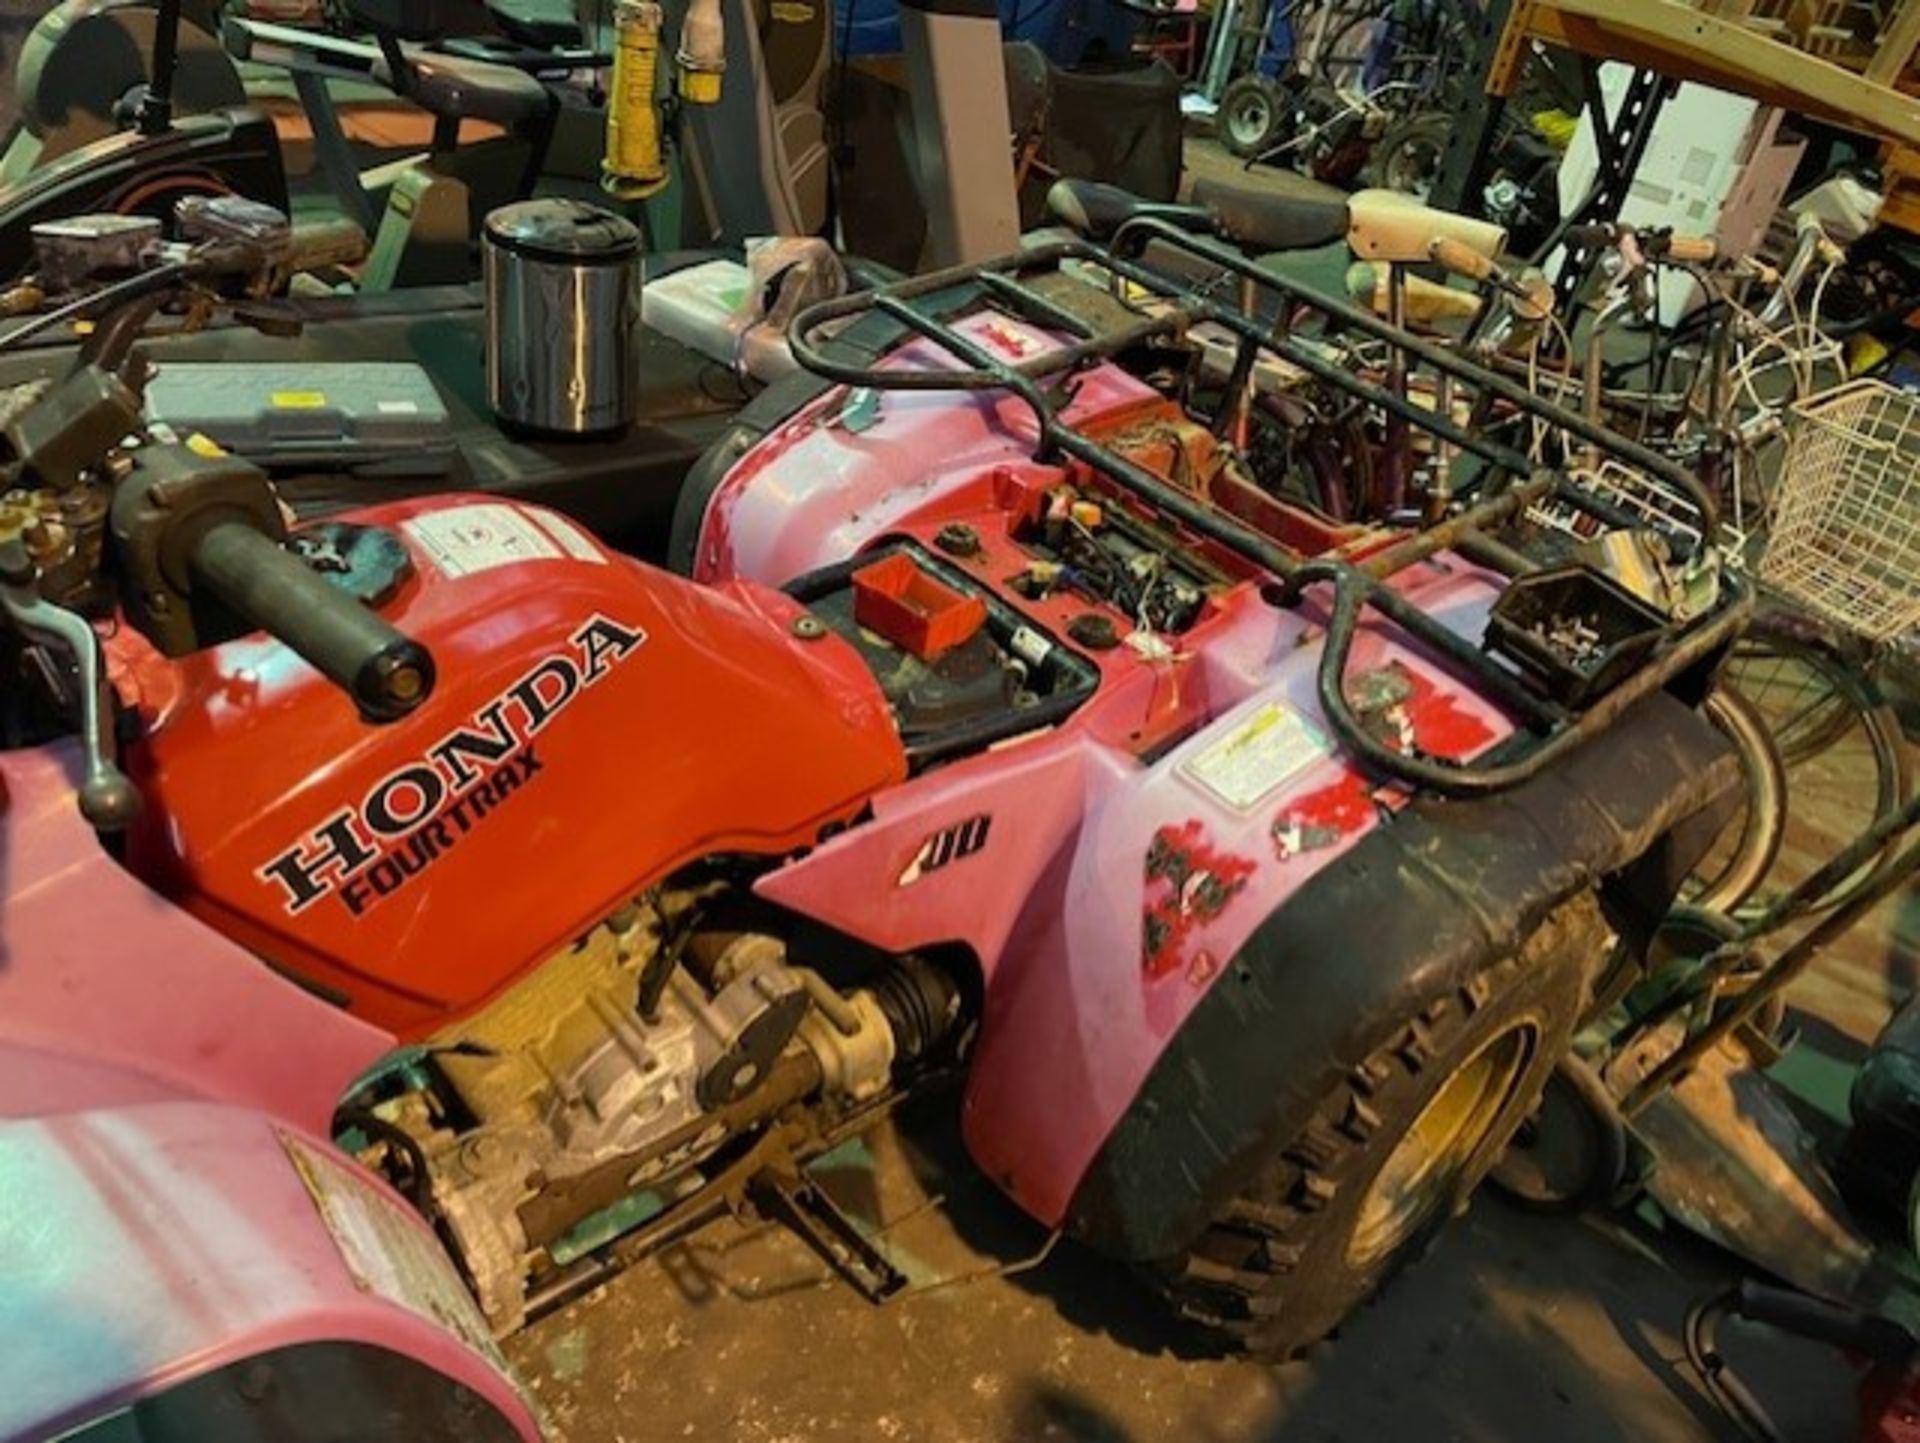 Honda fortrax quad bike late 80s non runner all together - Image 5 of 7